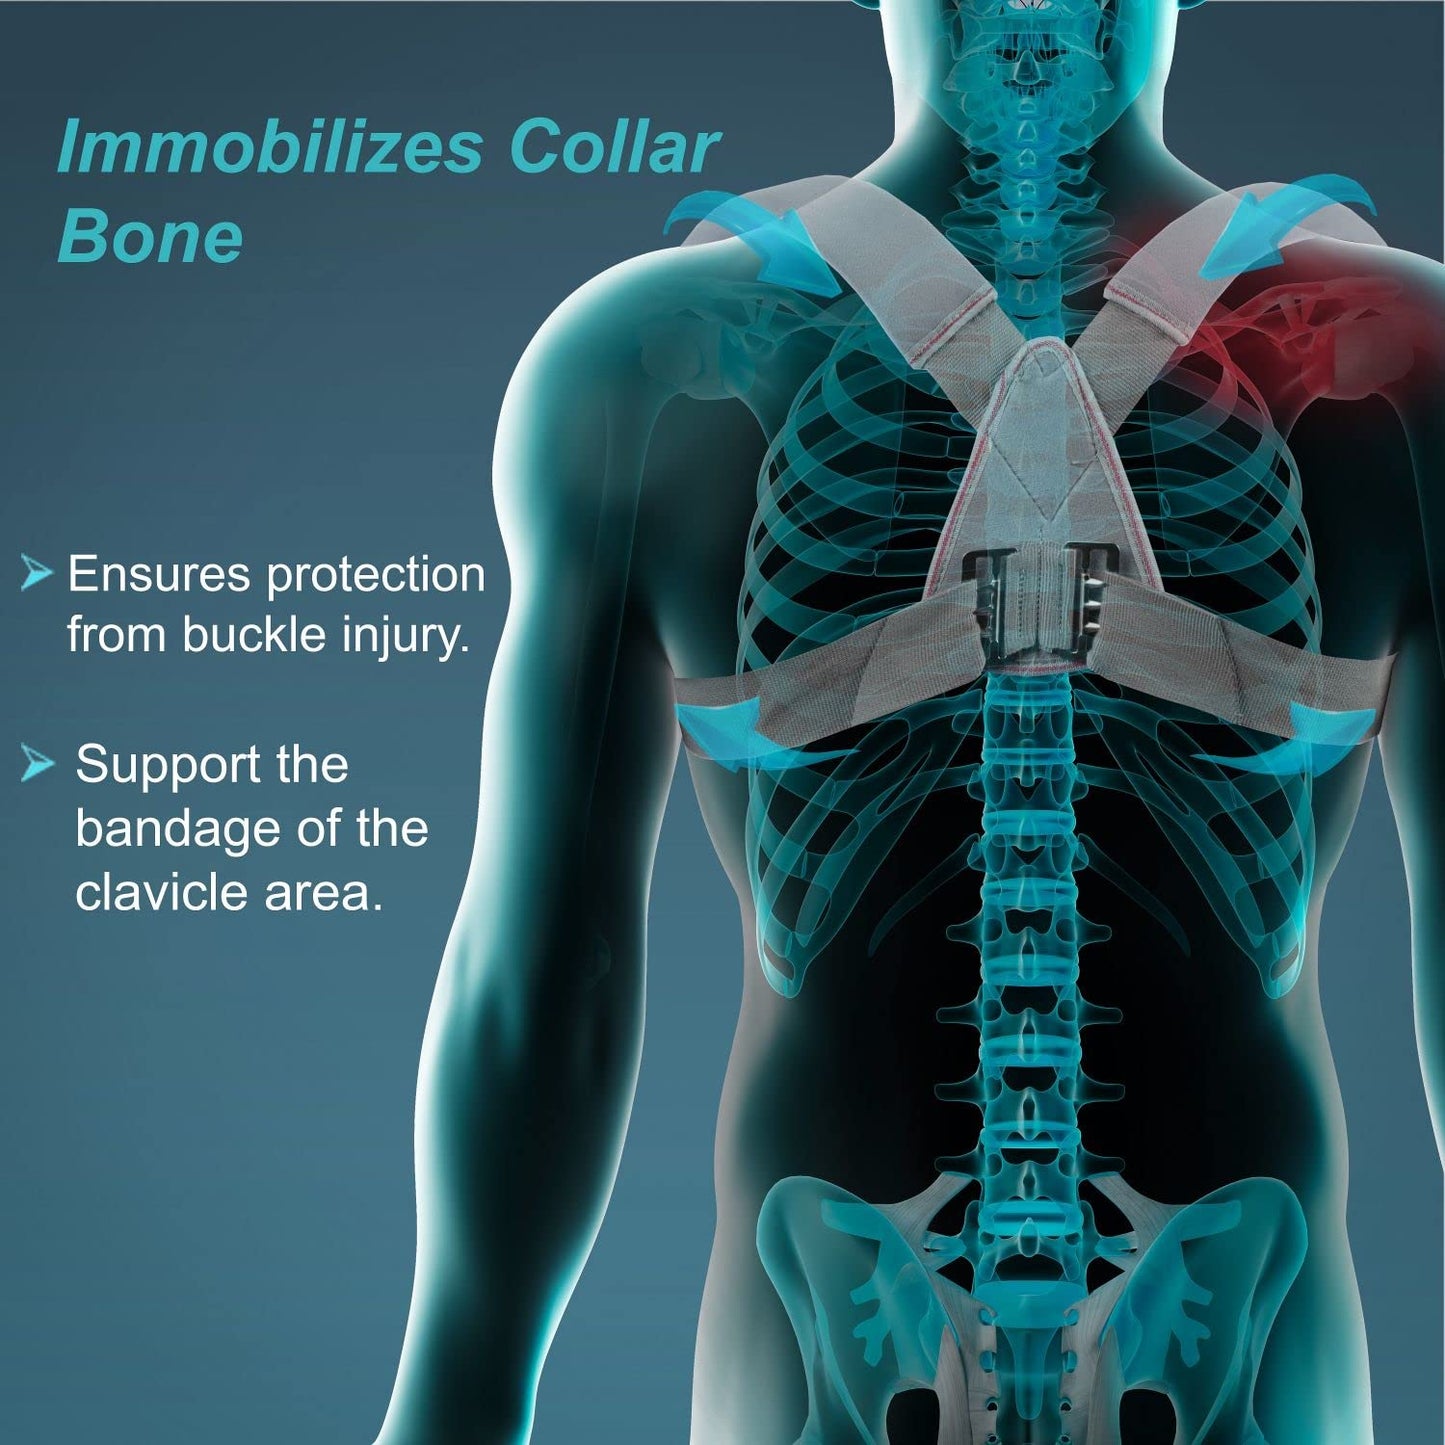 Tynor Clavicle Brace with Buckle